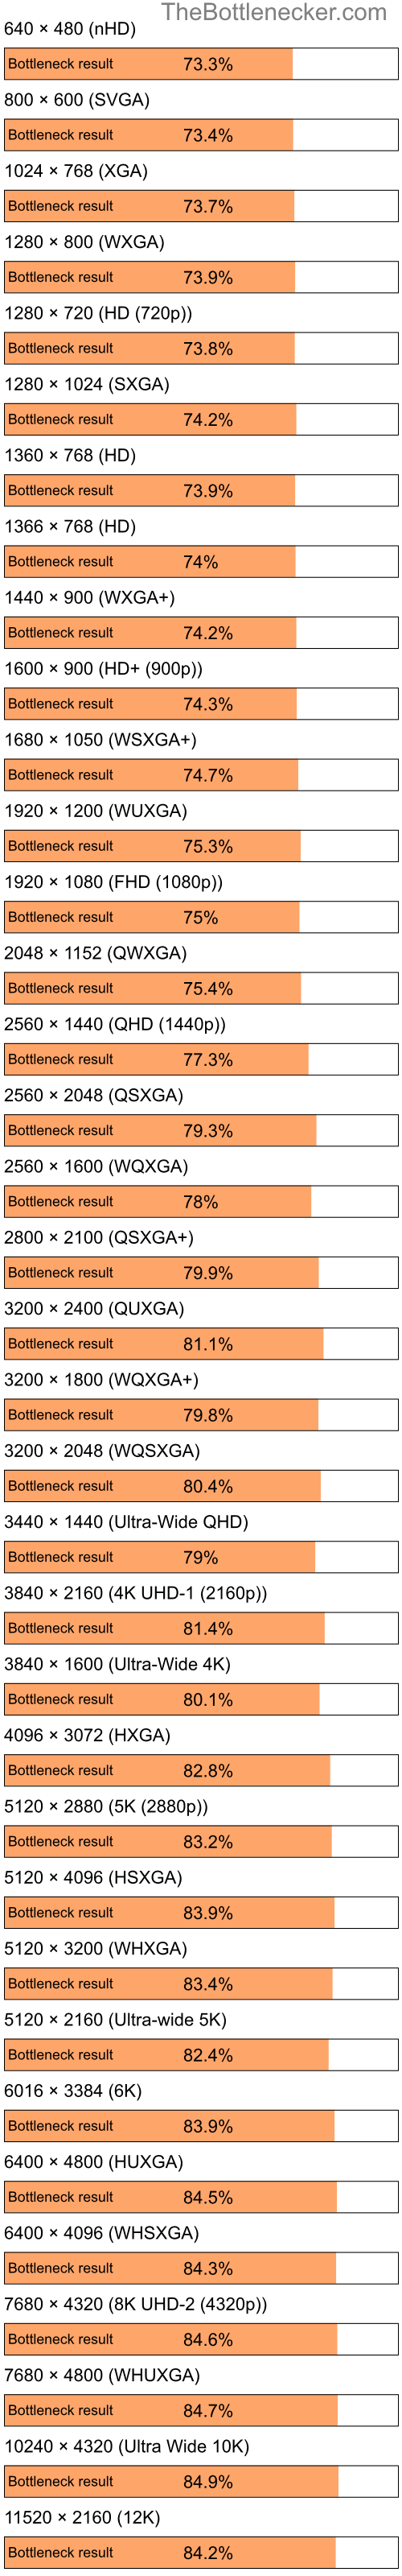 Bottleneck results by resolution for Intel Pentium 4 and NVIDIA GeForce 9100 in Graphic Card Intense Tasks